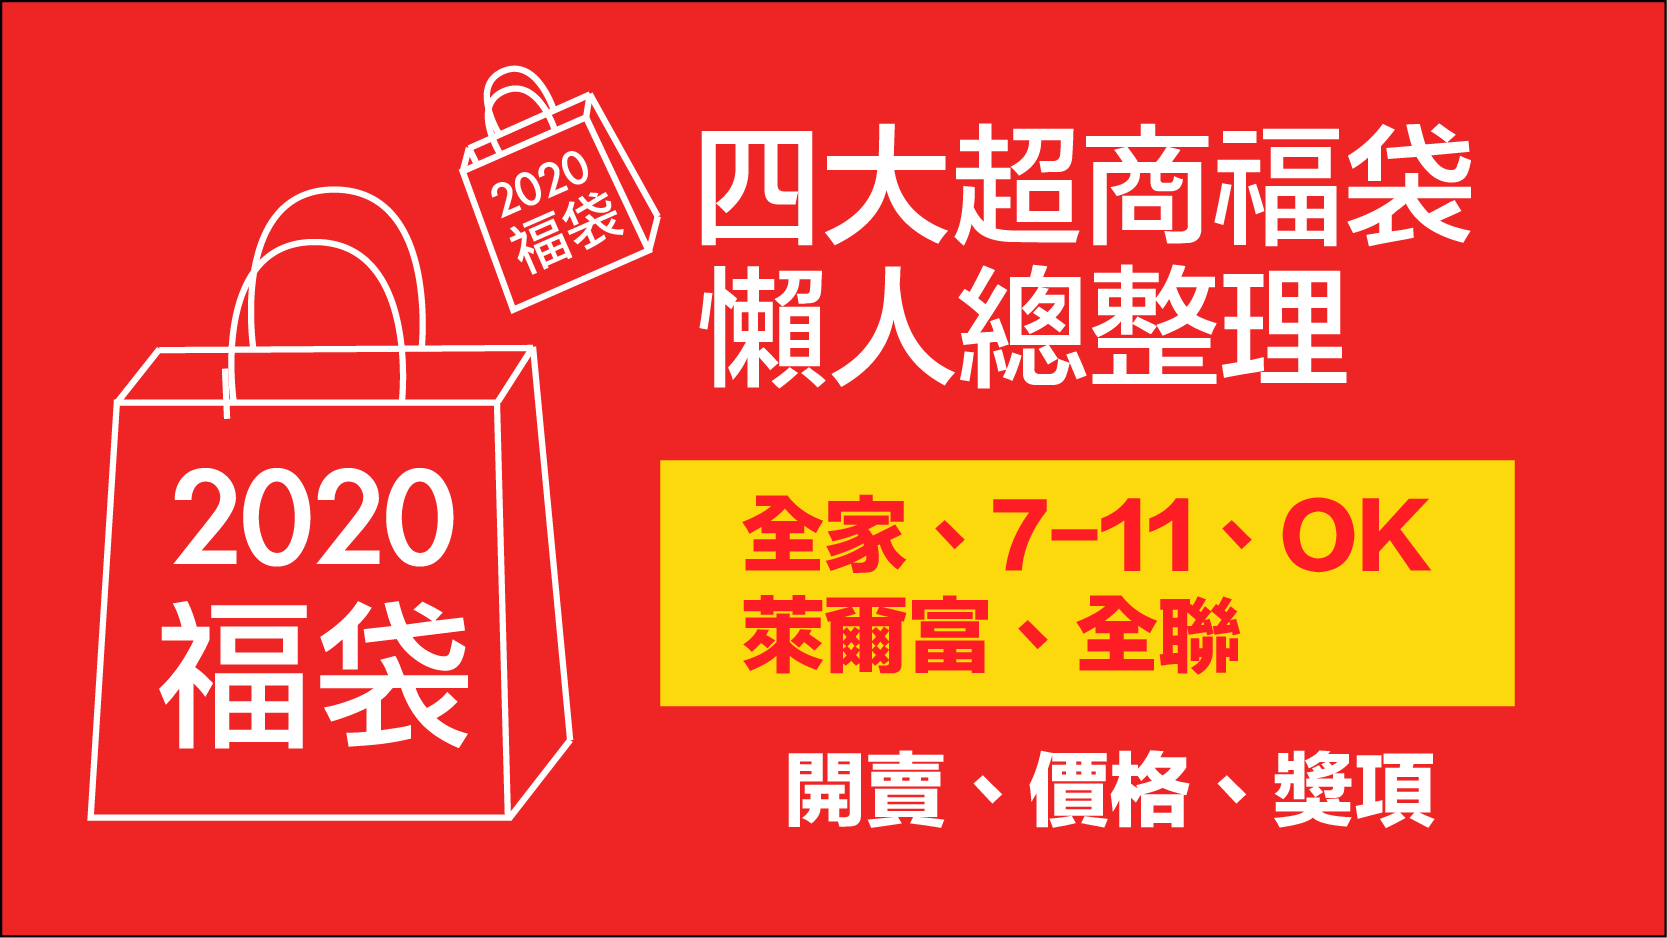 convenience store lucky bag 2020 total finishing cover